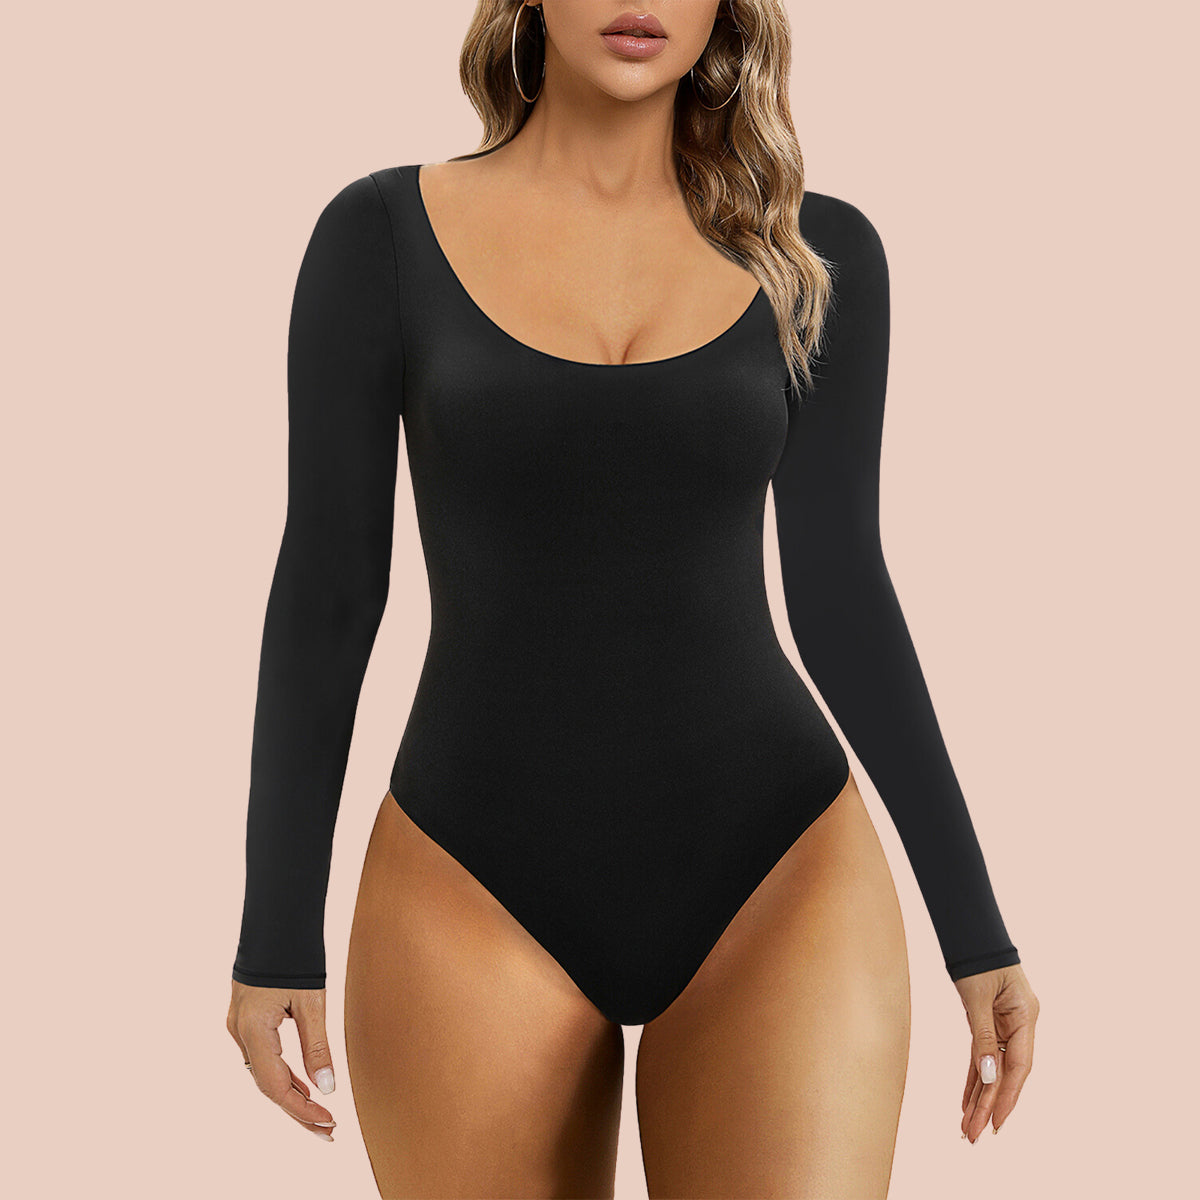 SHAPERX Women's Long Sleeve Bodysuit Fits Everybody Soft V Neck Basic Tops  with Thong